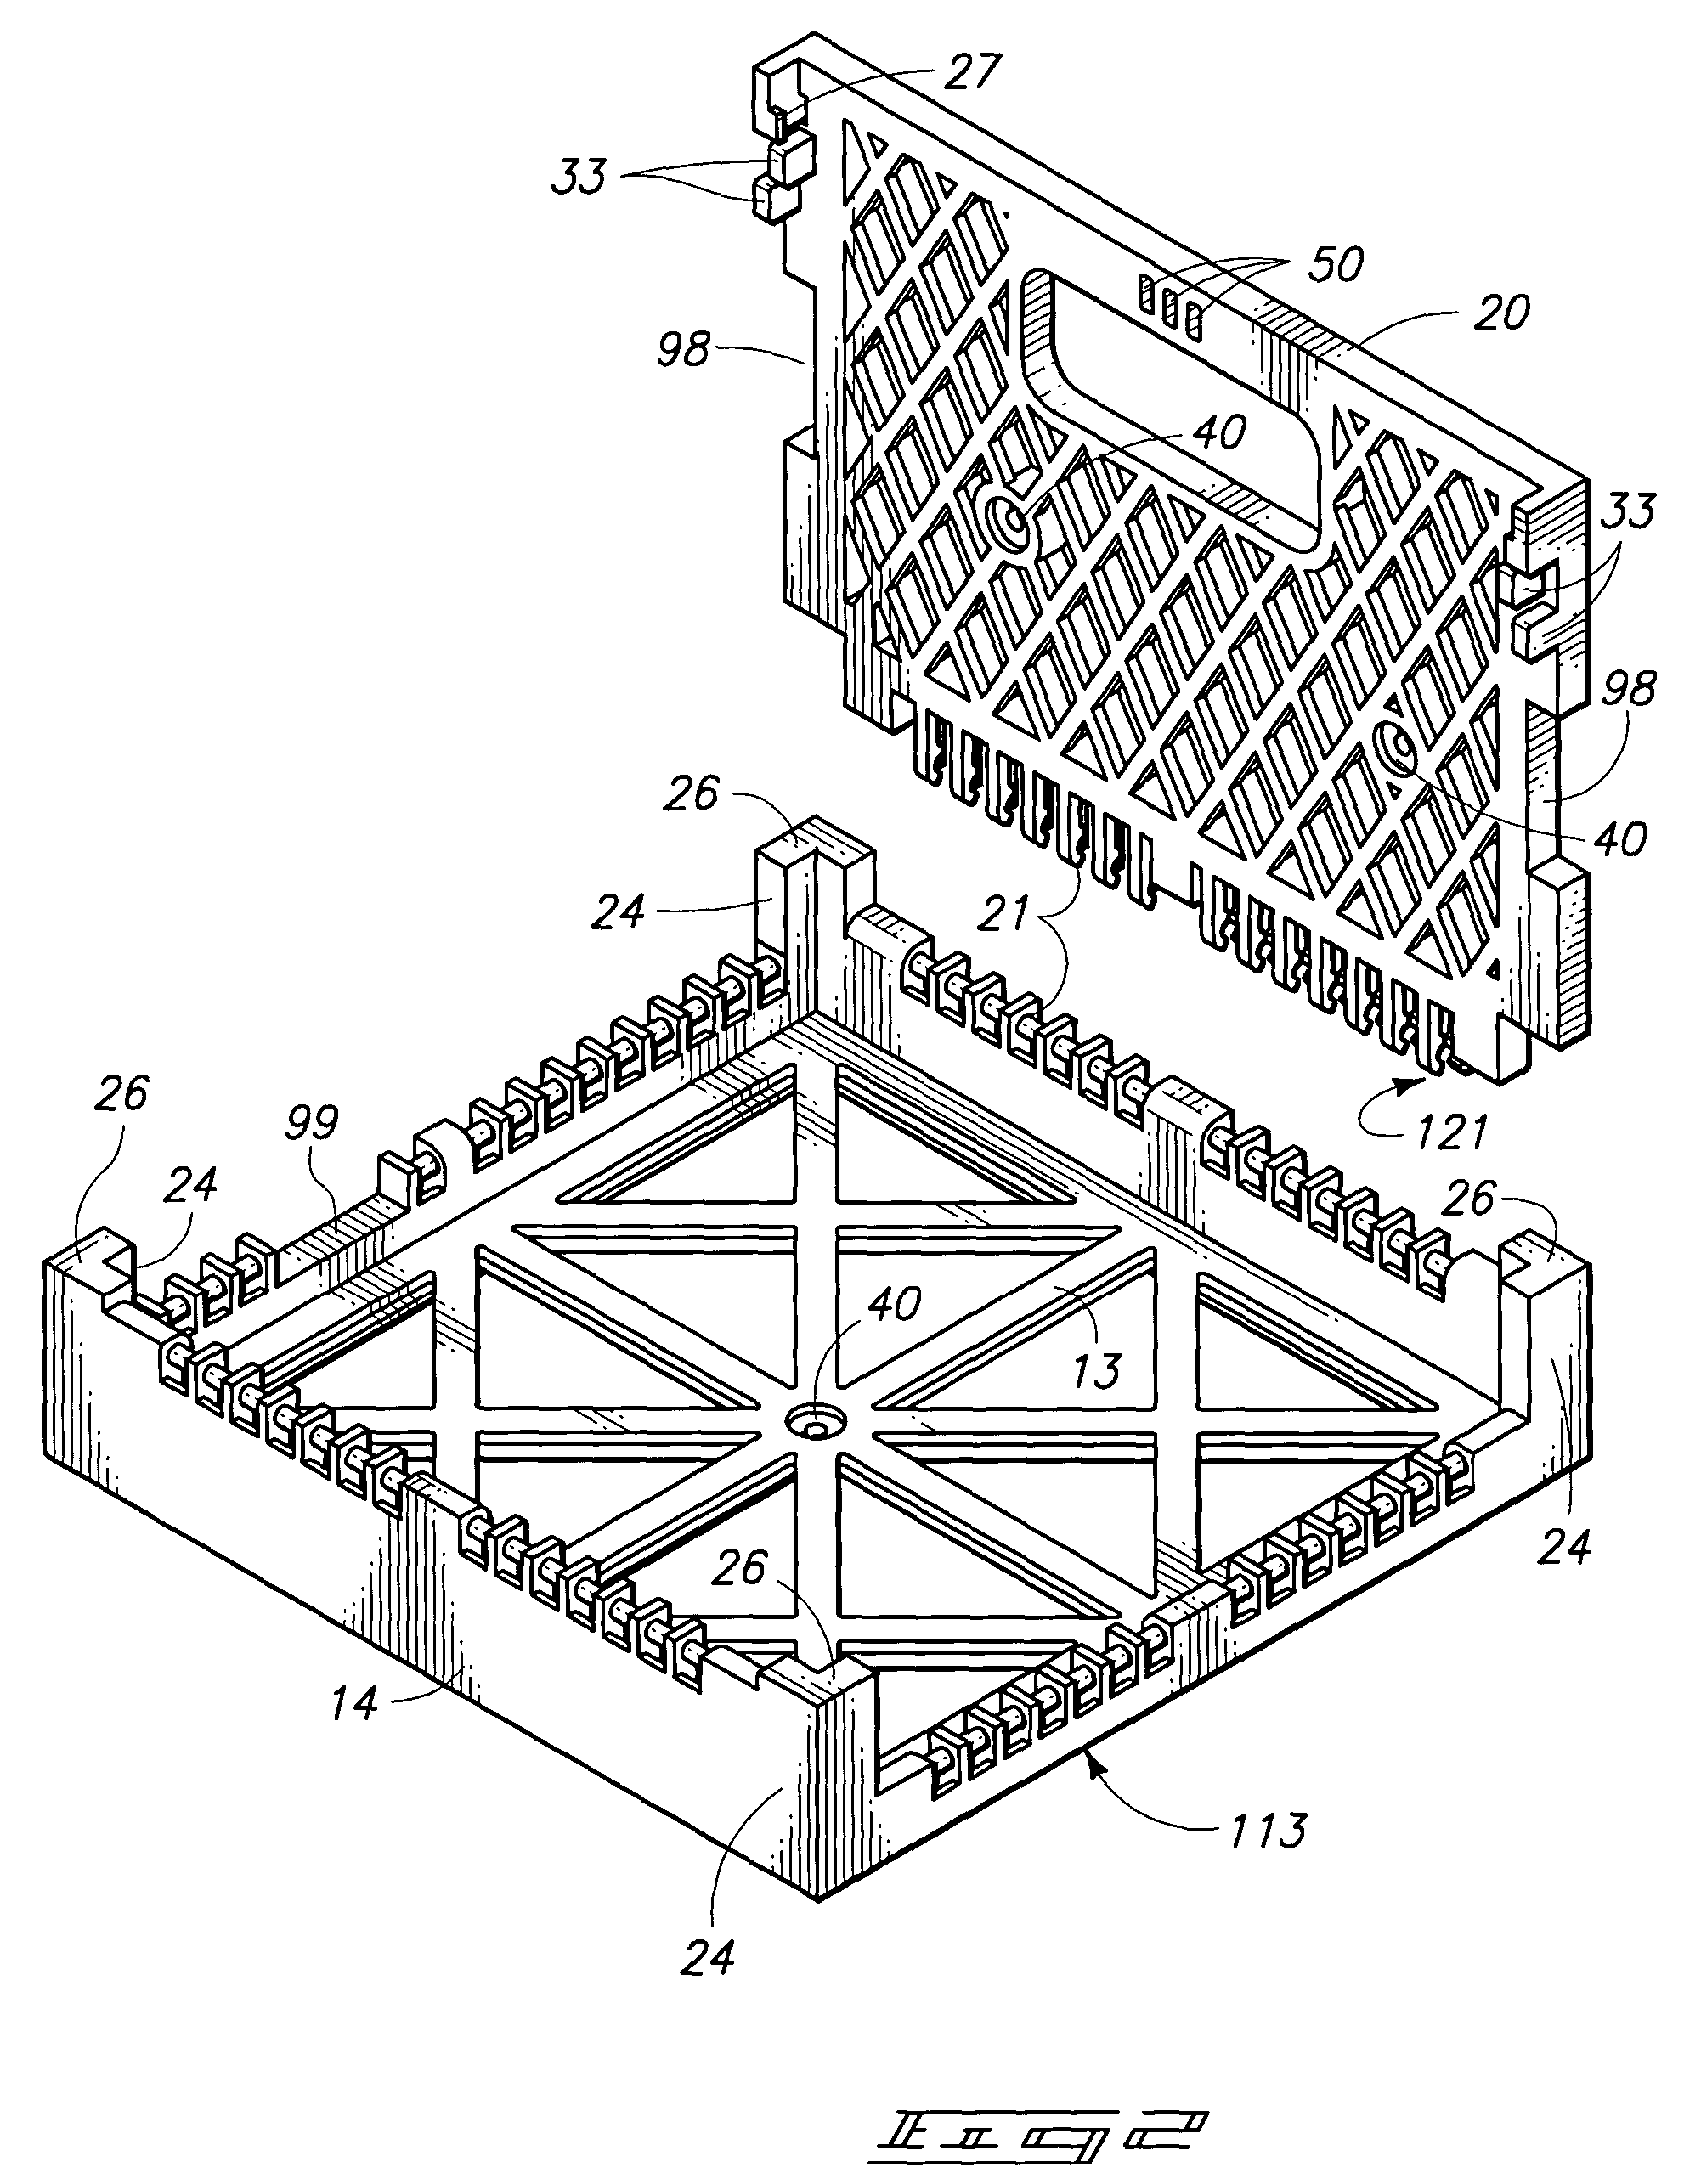 Folding crate with array connection features